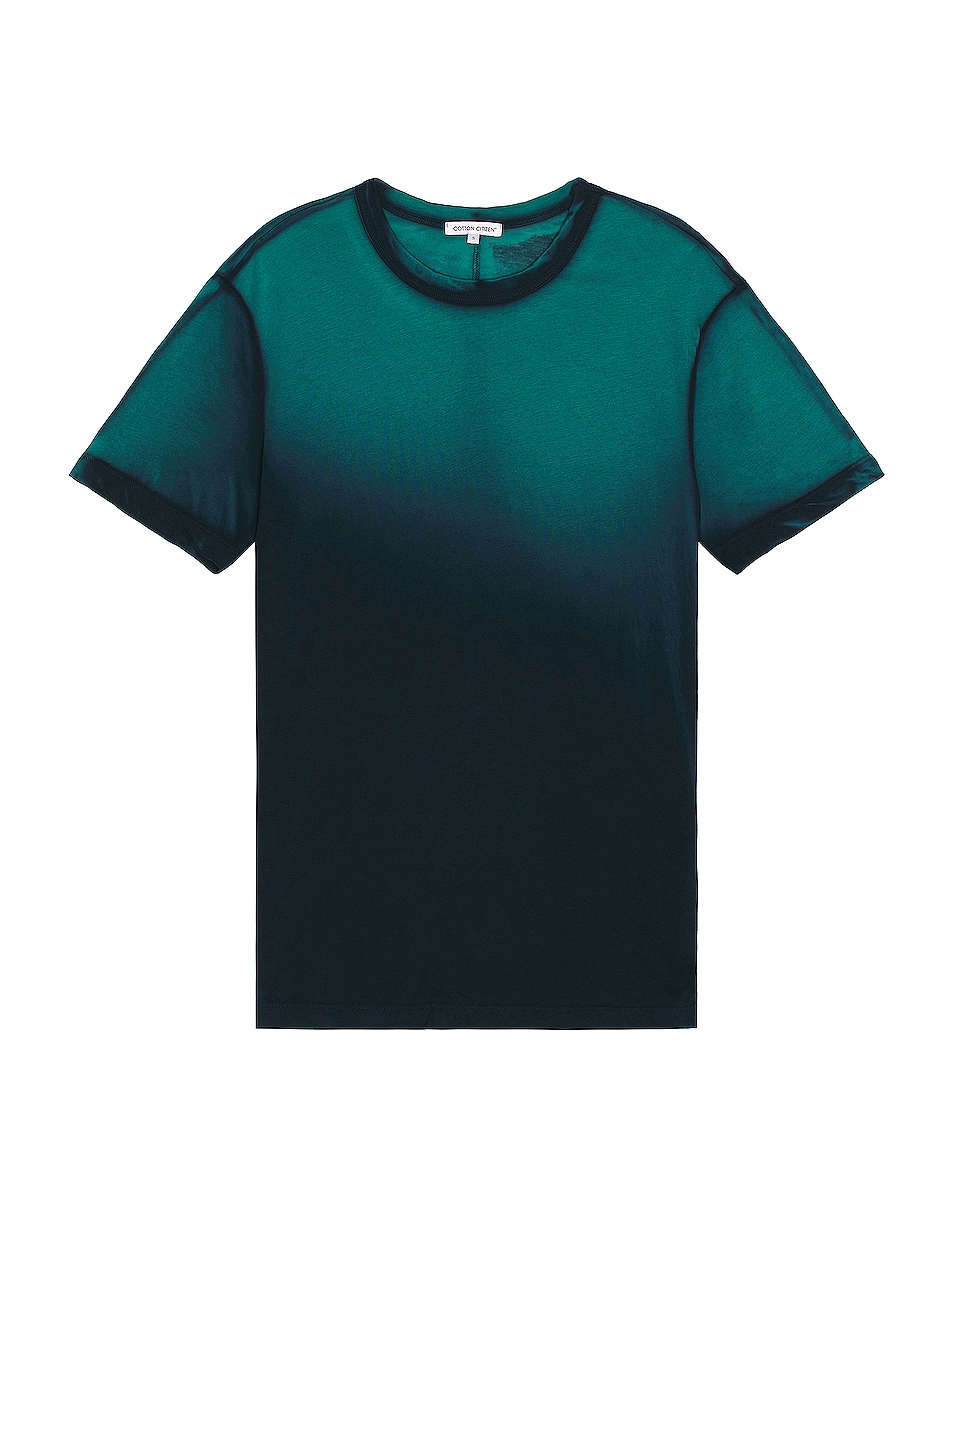 Image 1 of COTTON CITIZEN the Prince Tee in Teal Blue Cast